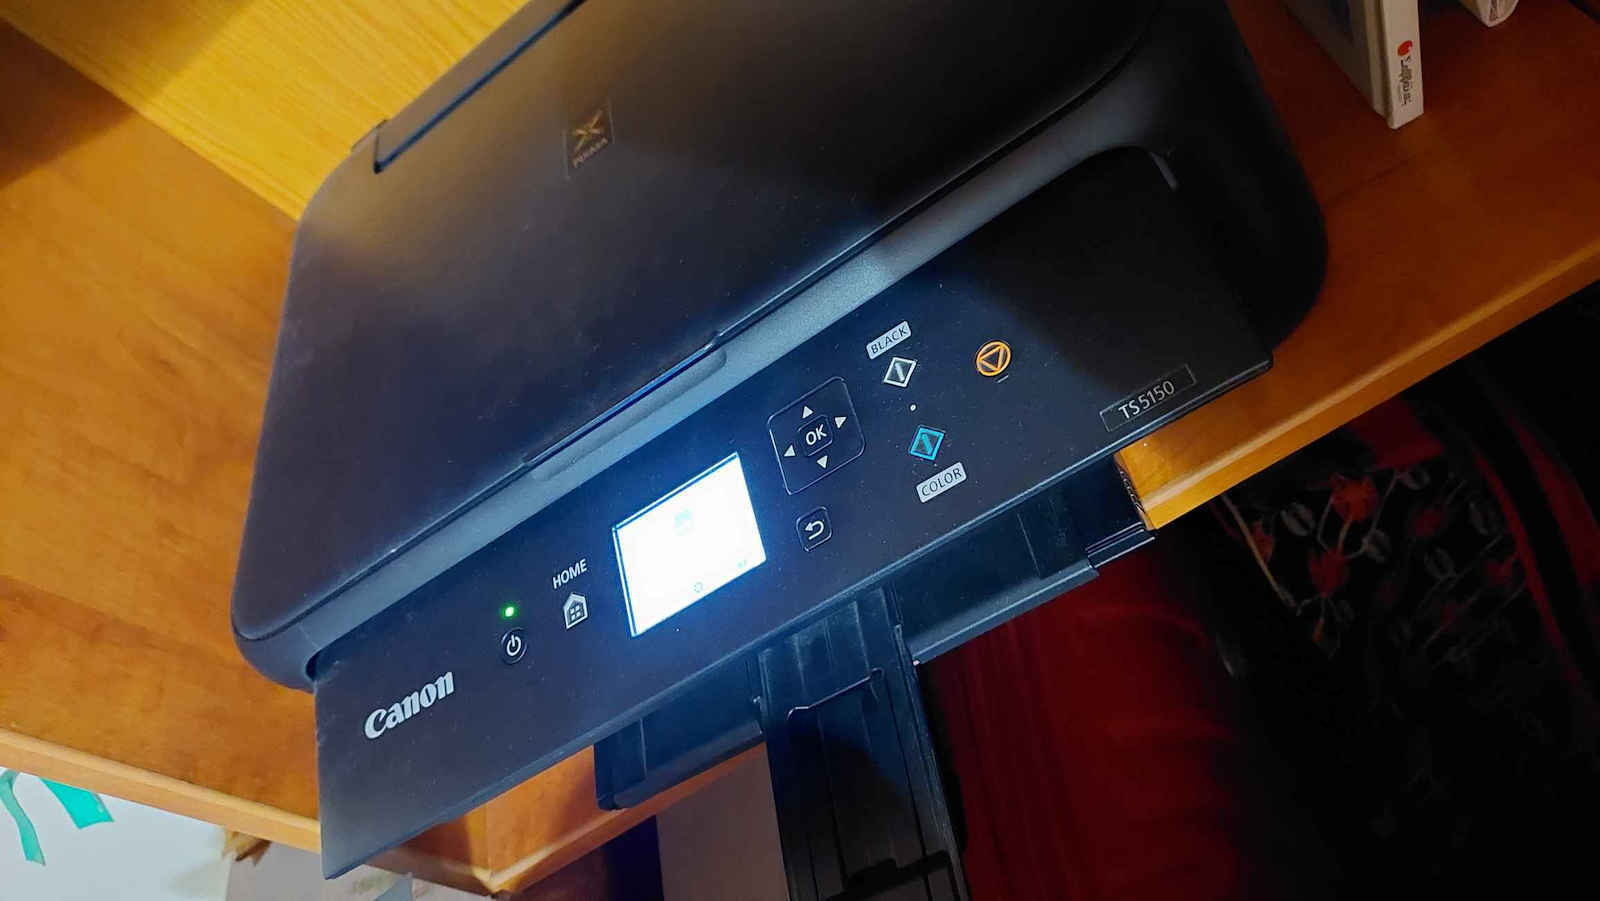 Canon Pixma TS5050 review: a smart-looking MFP with good all-round  performance